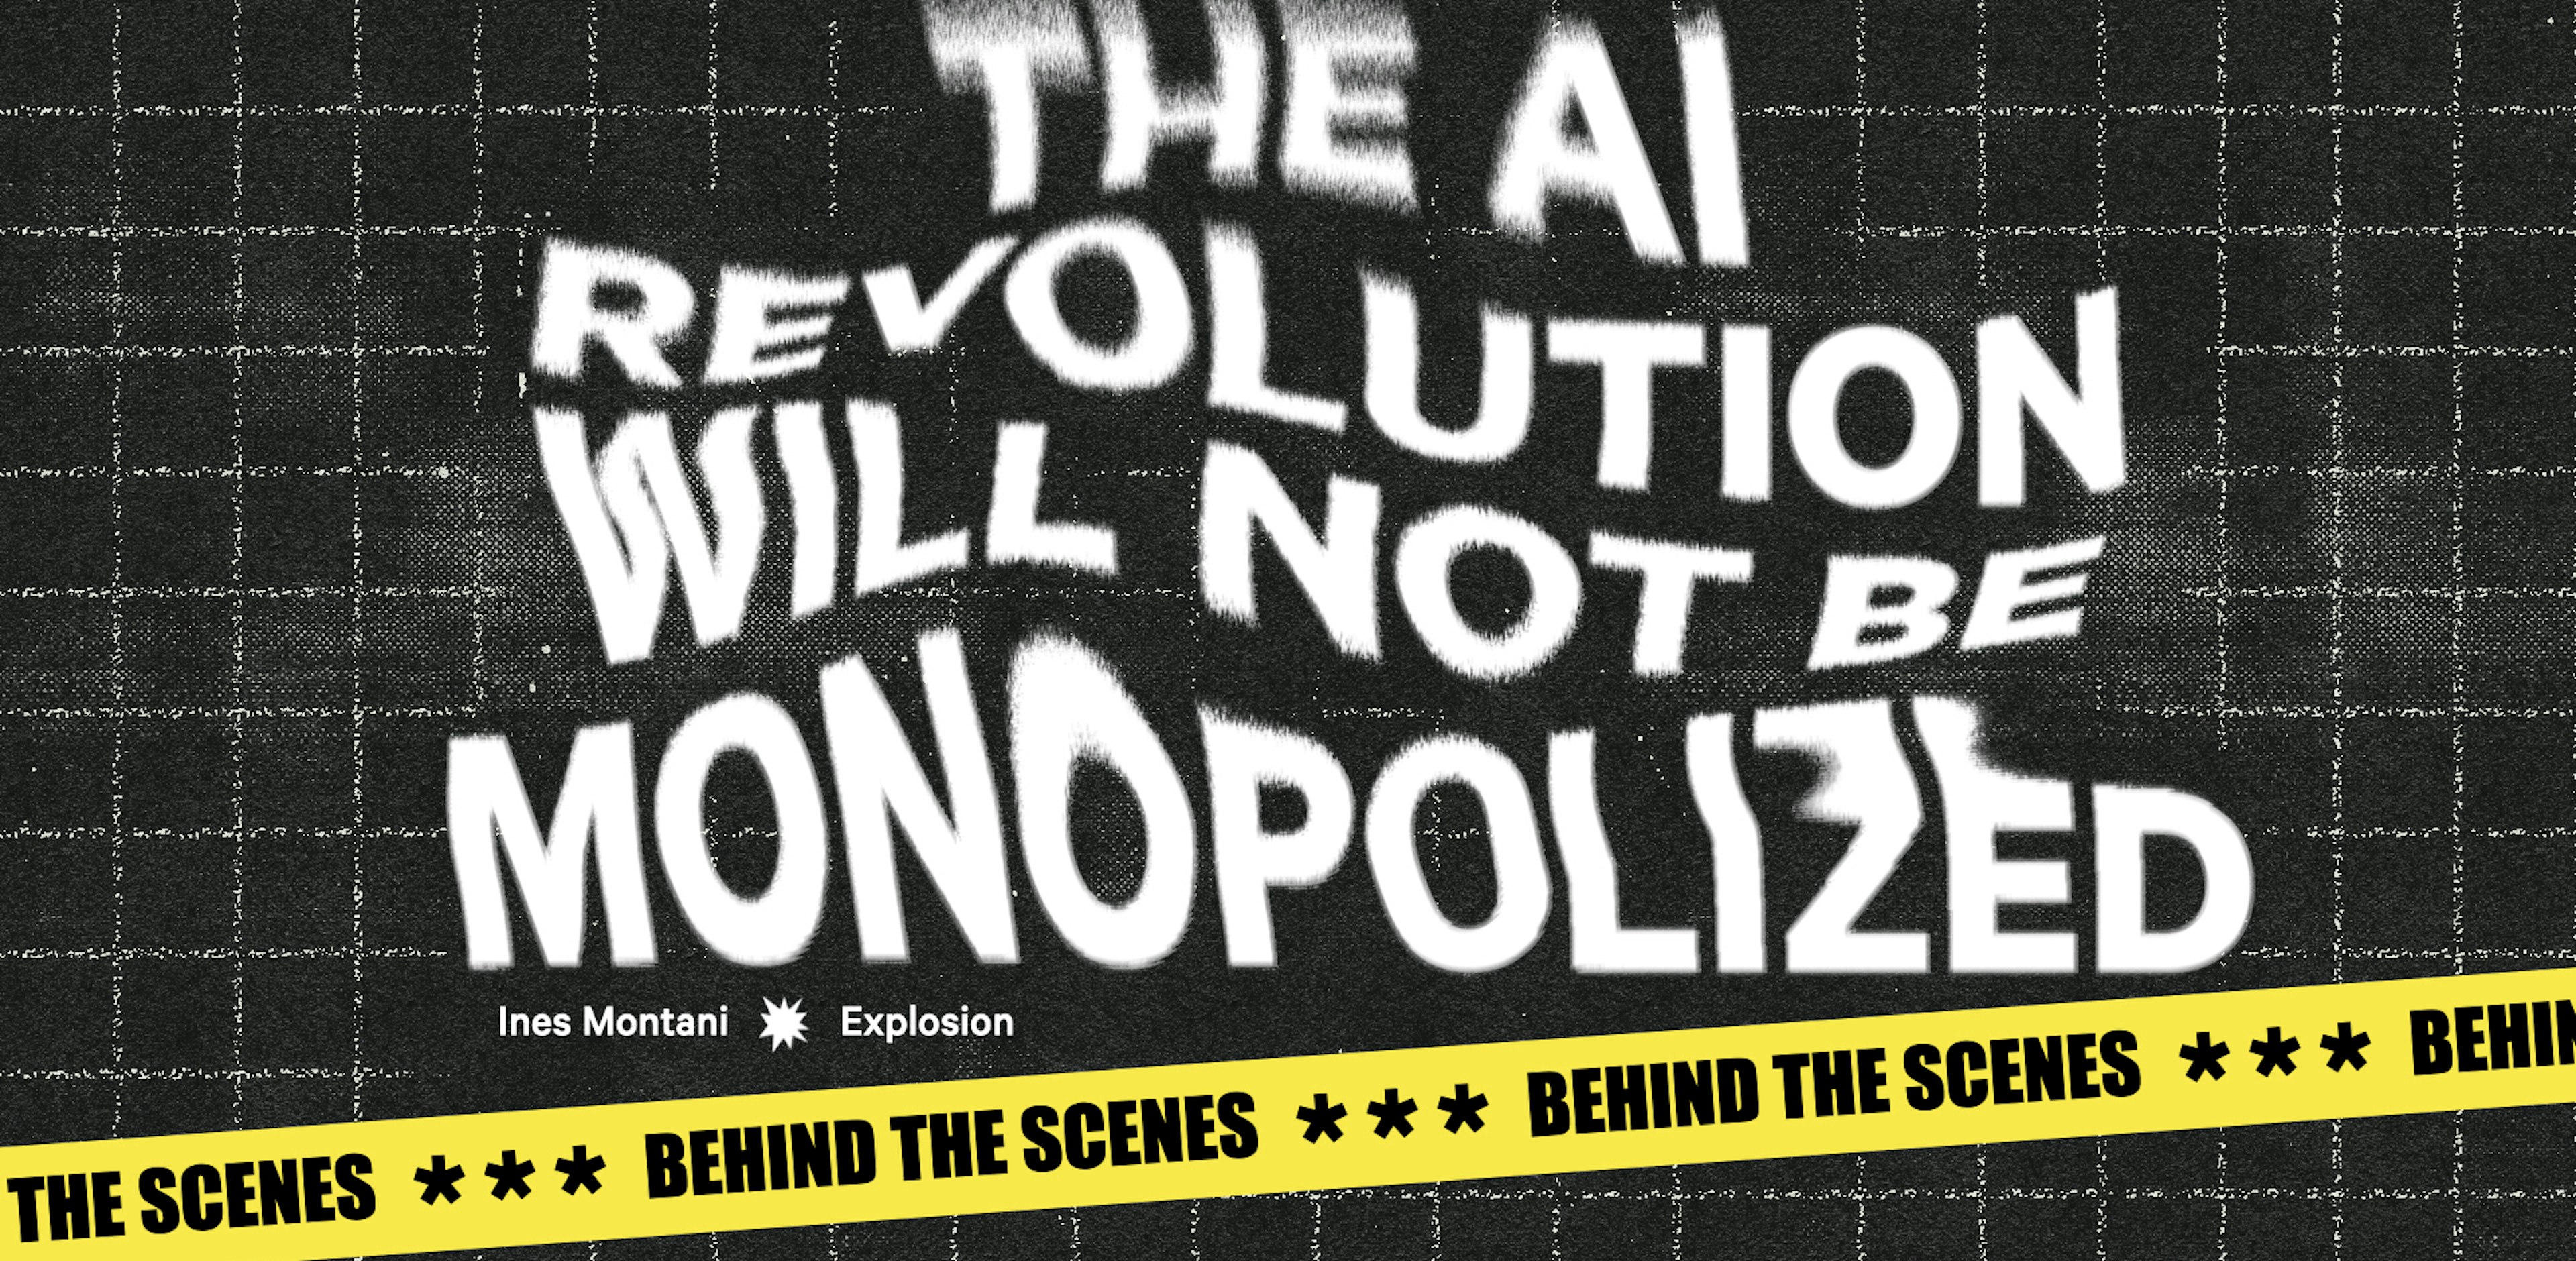 The AI Revolution Will Not Be Monopolized: Behind the scenes